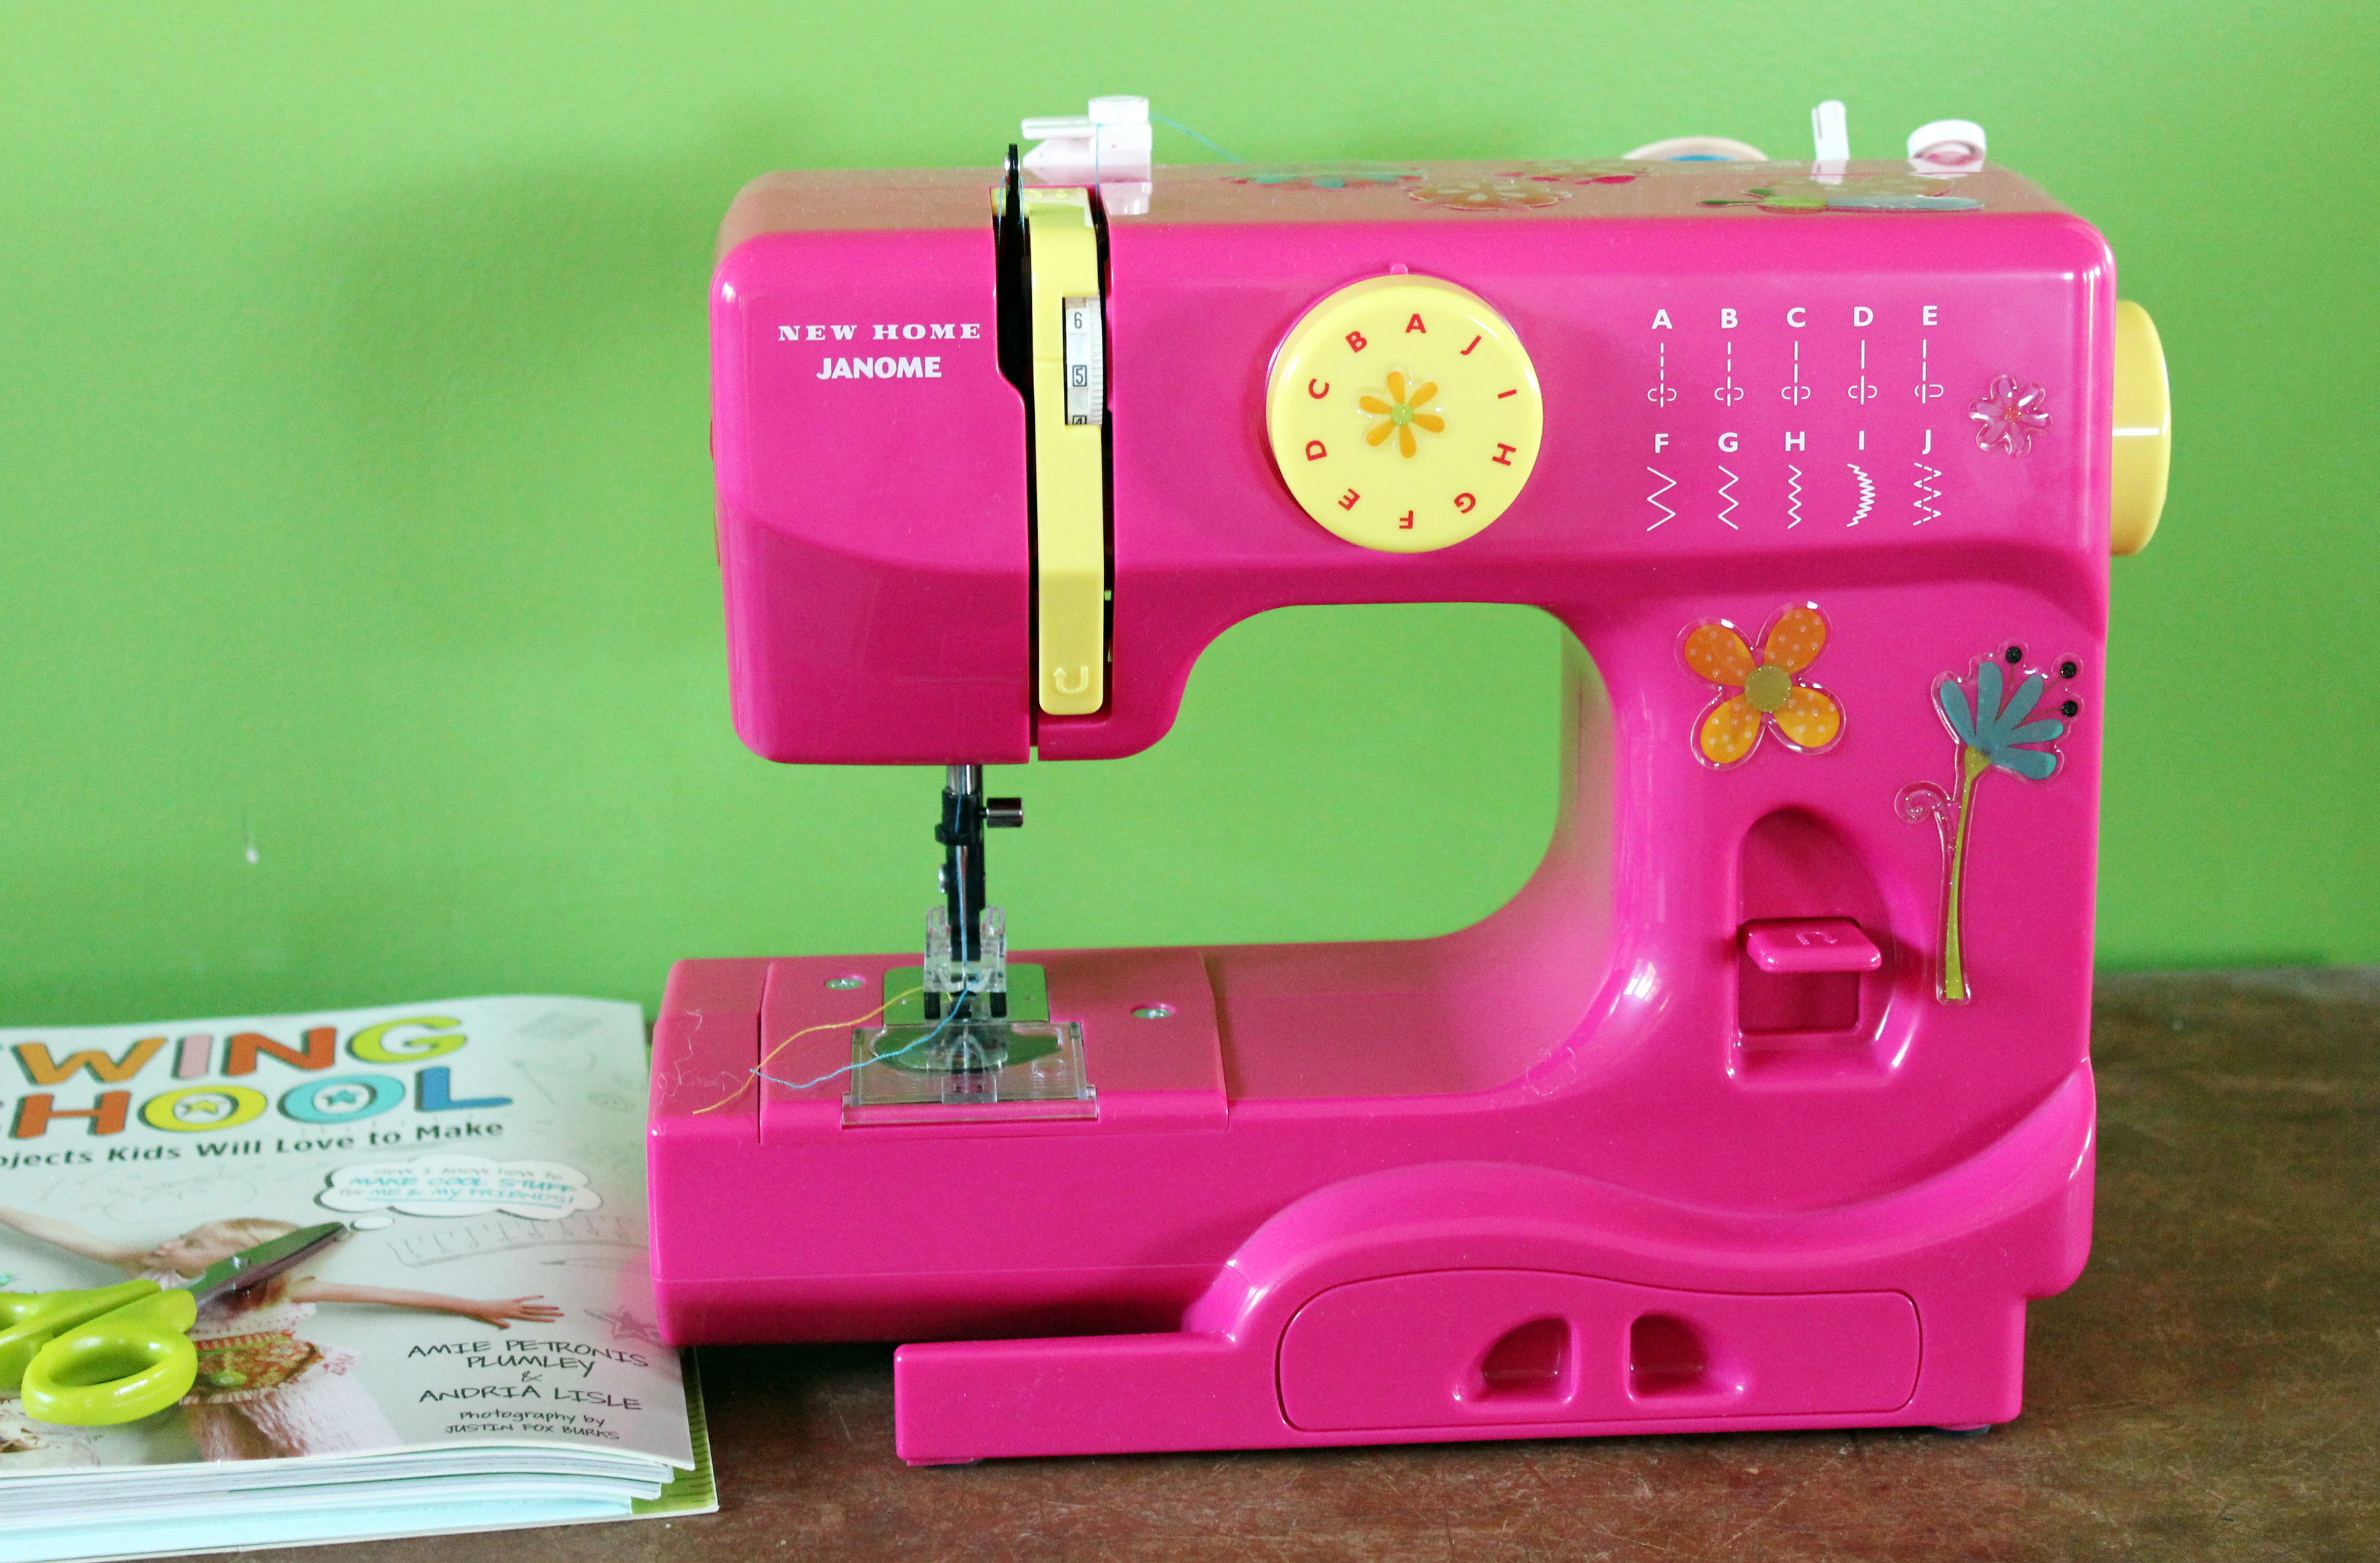 She wanted a sewing machine.